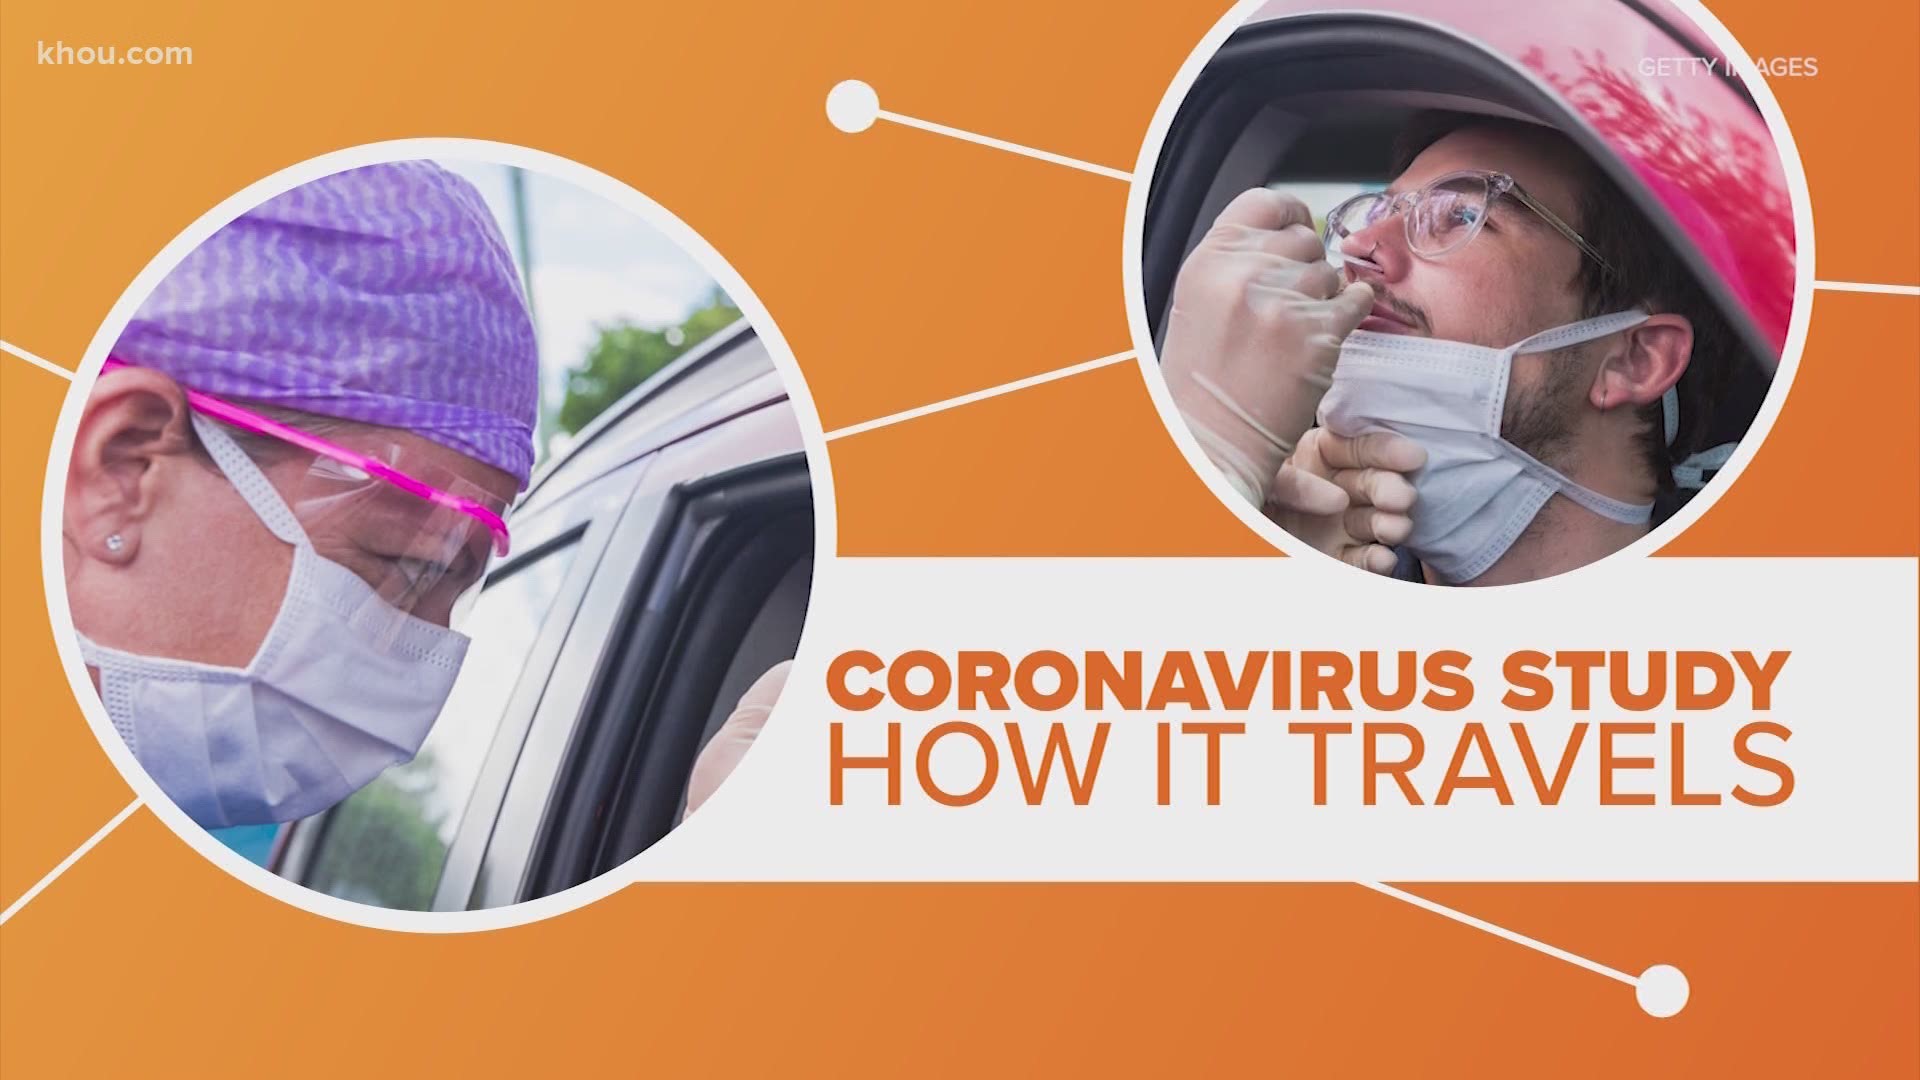 A recent study further explains how coronavirus spreads through the human body, starting with the nasal cavity. Let's connect the dots.